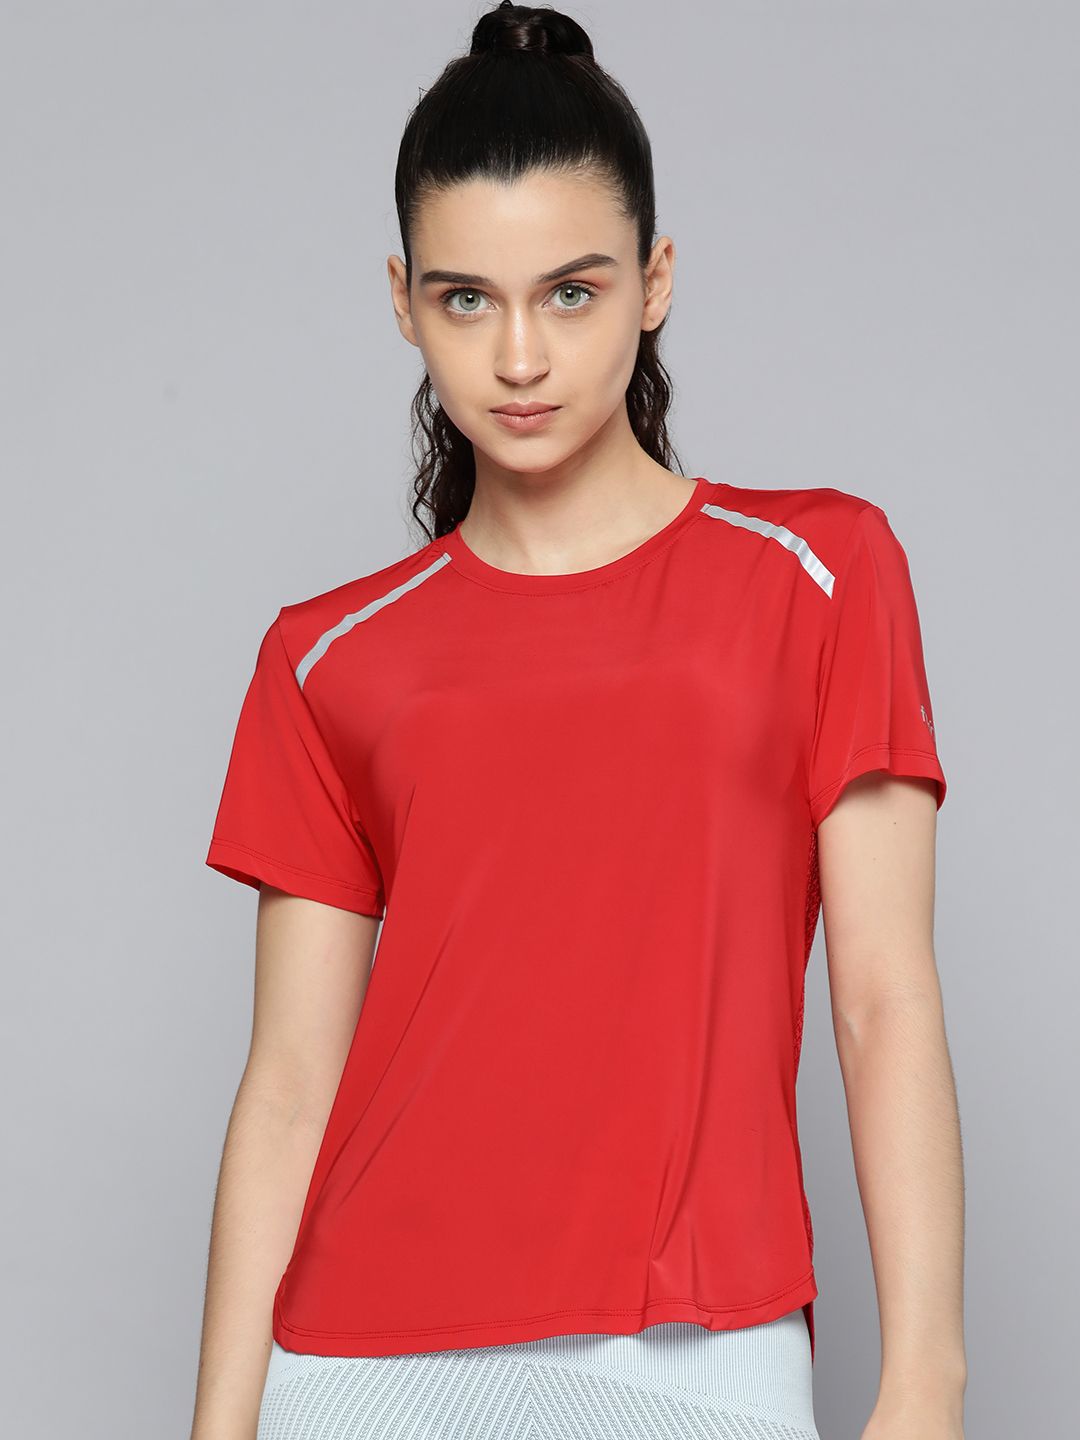 Fitkin Women Red Solid T-shirt Price in India